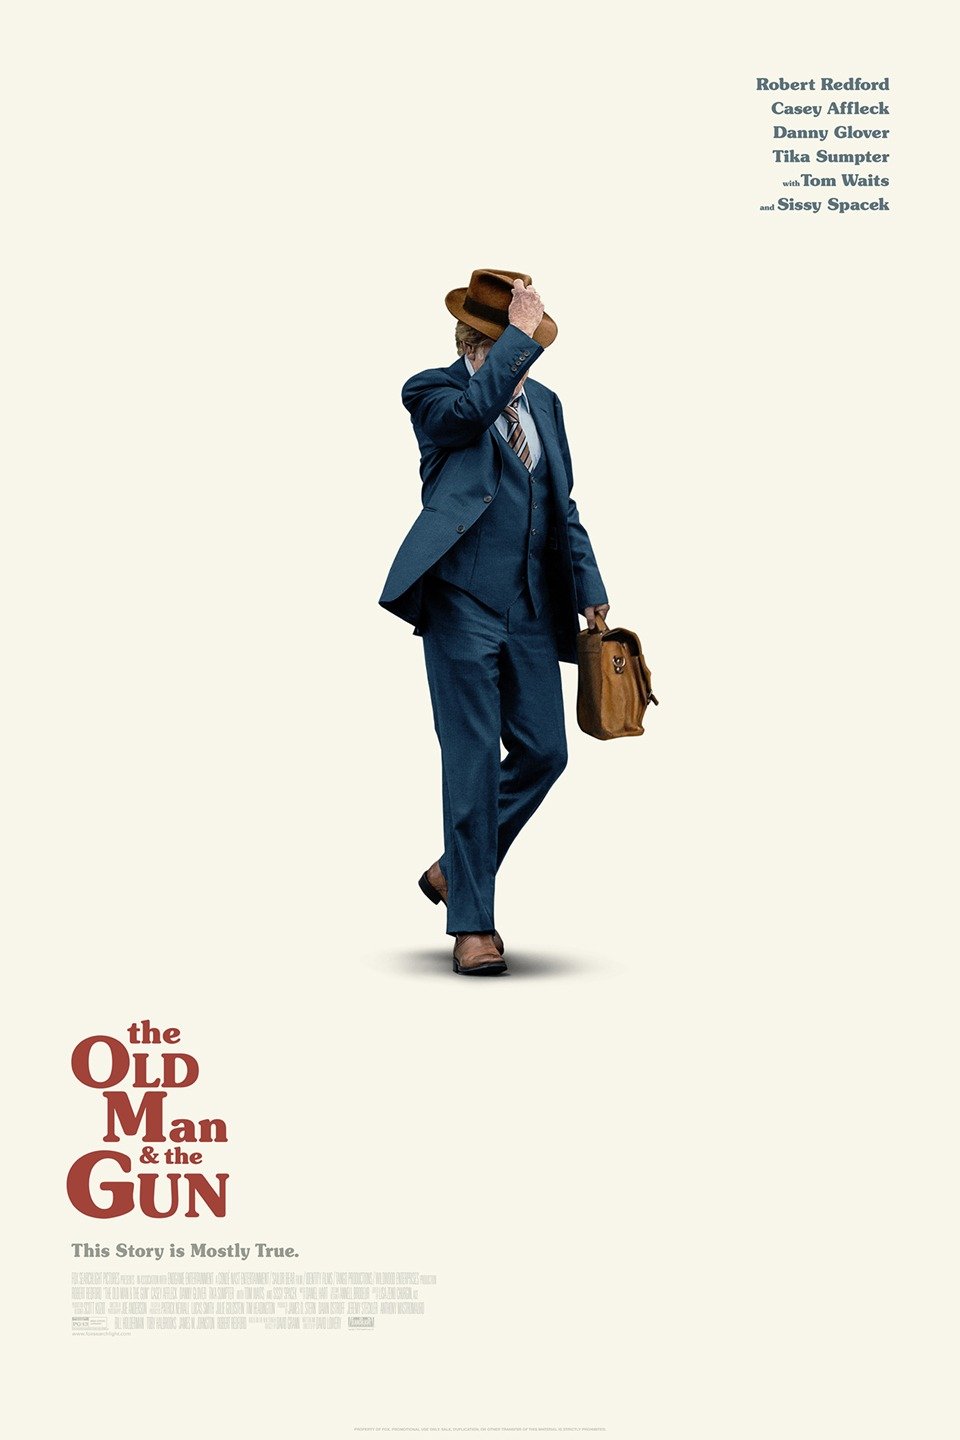 The Old Man & the Gun, directed by Robert Redford